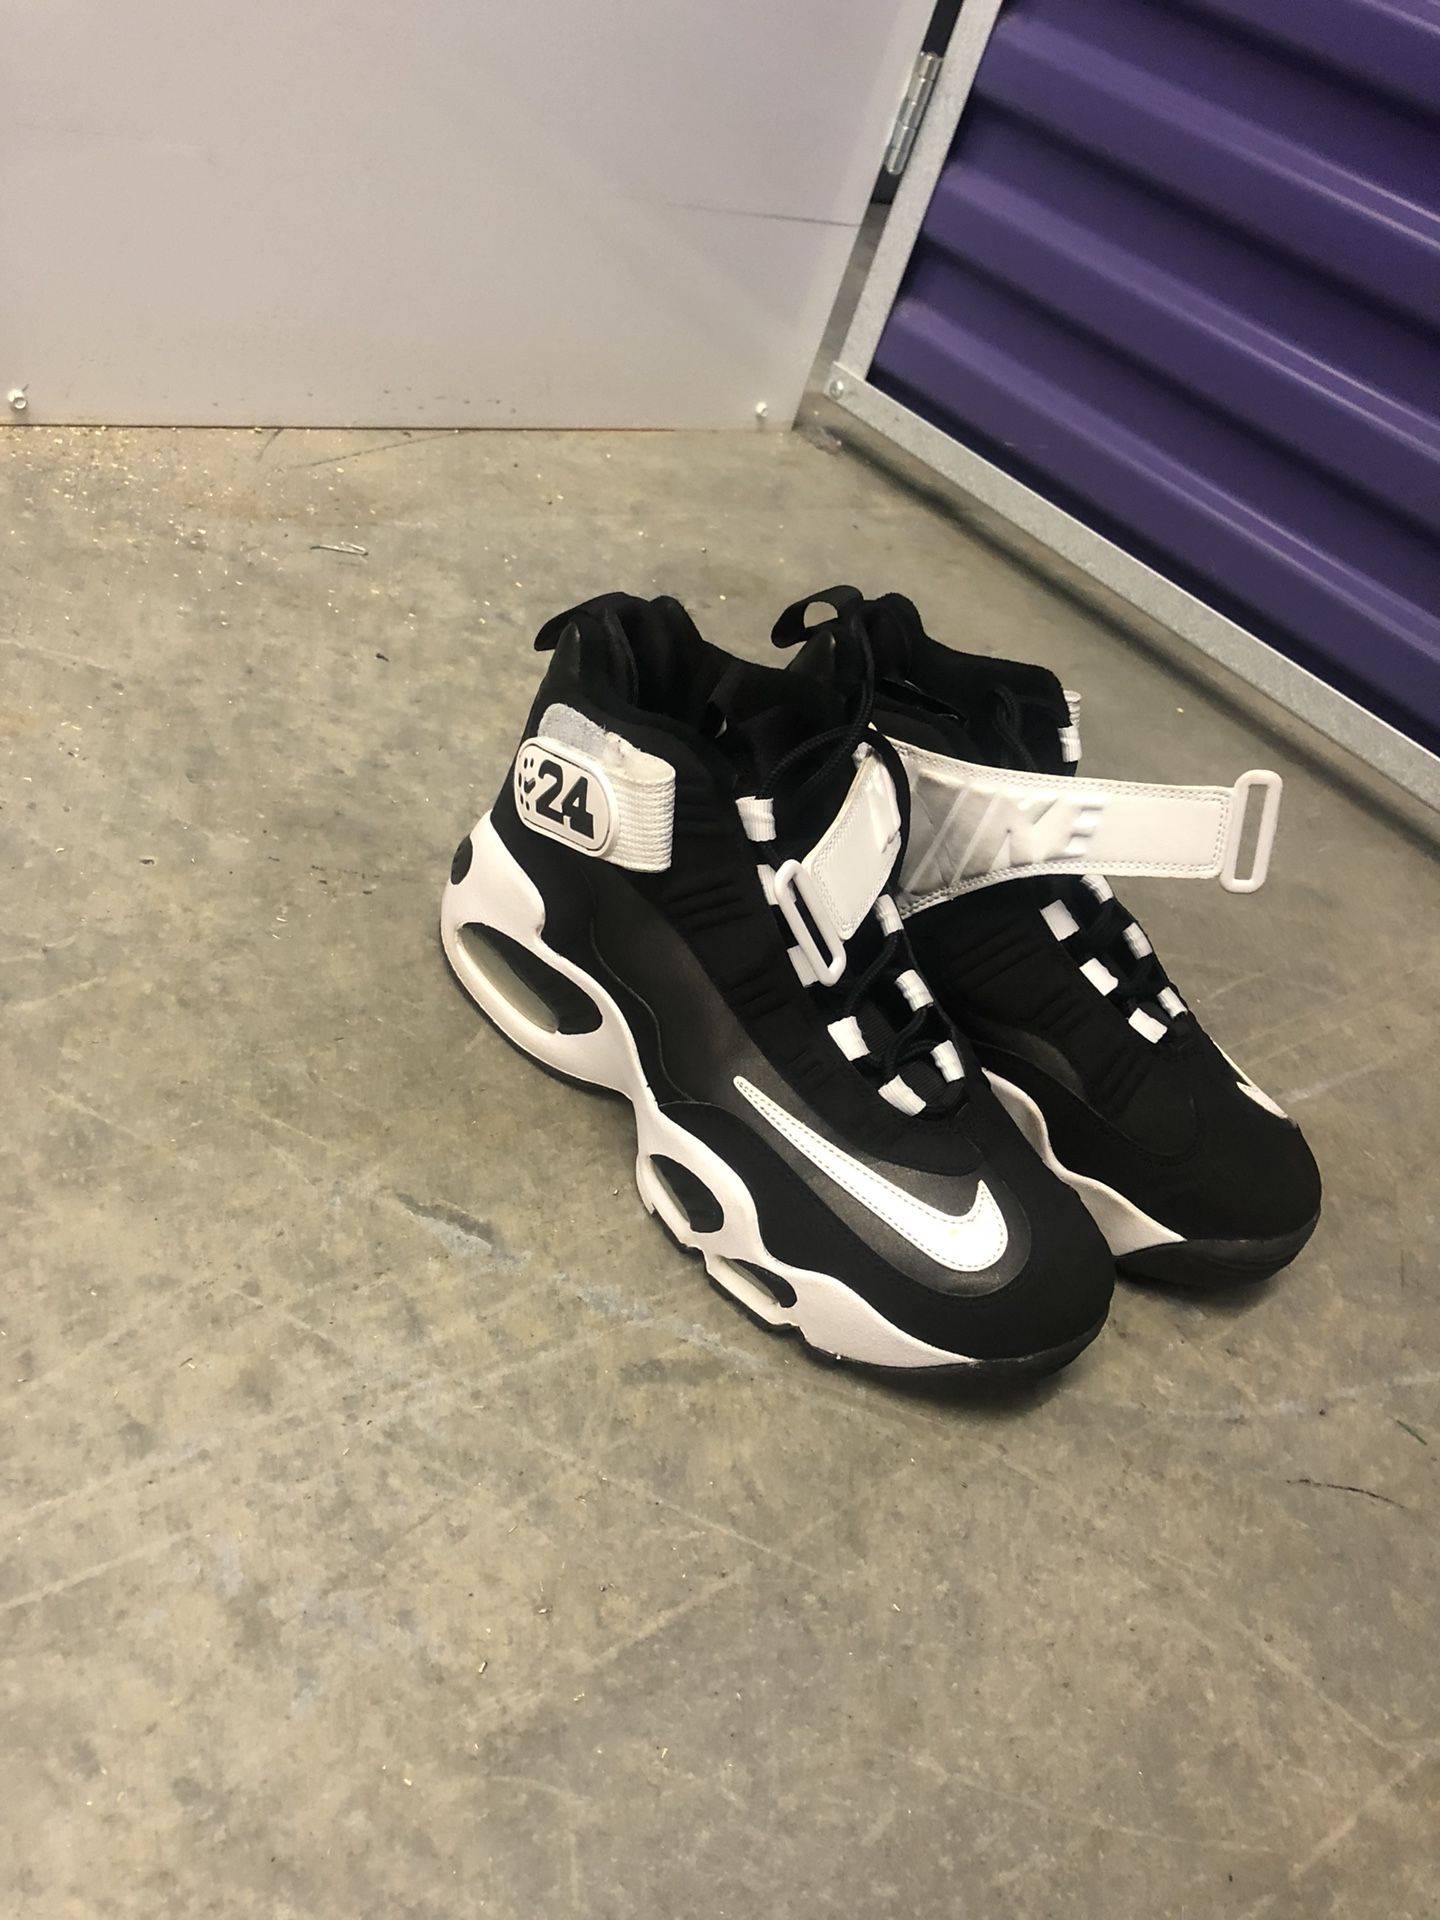 Nike Air Griffey’s Shoes